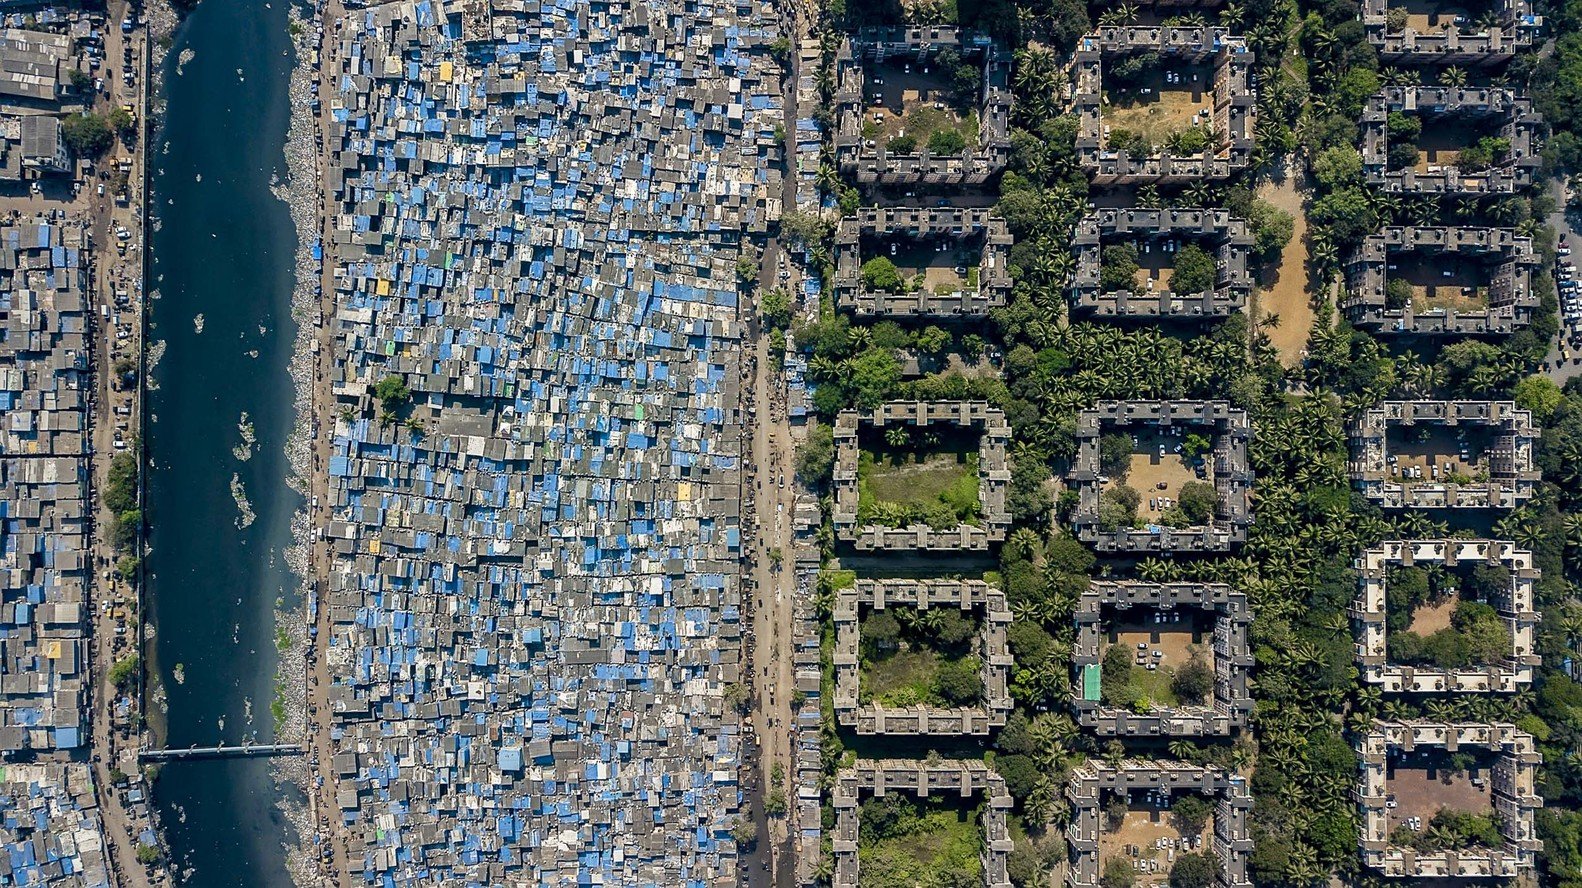 The 99% and the 1% – Drone photography of income inequality across the world